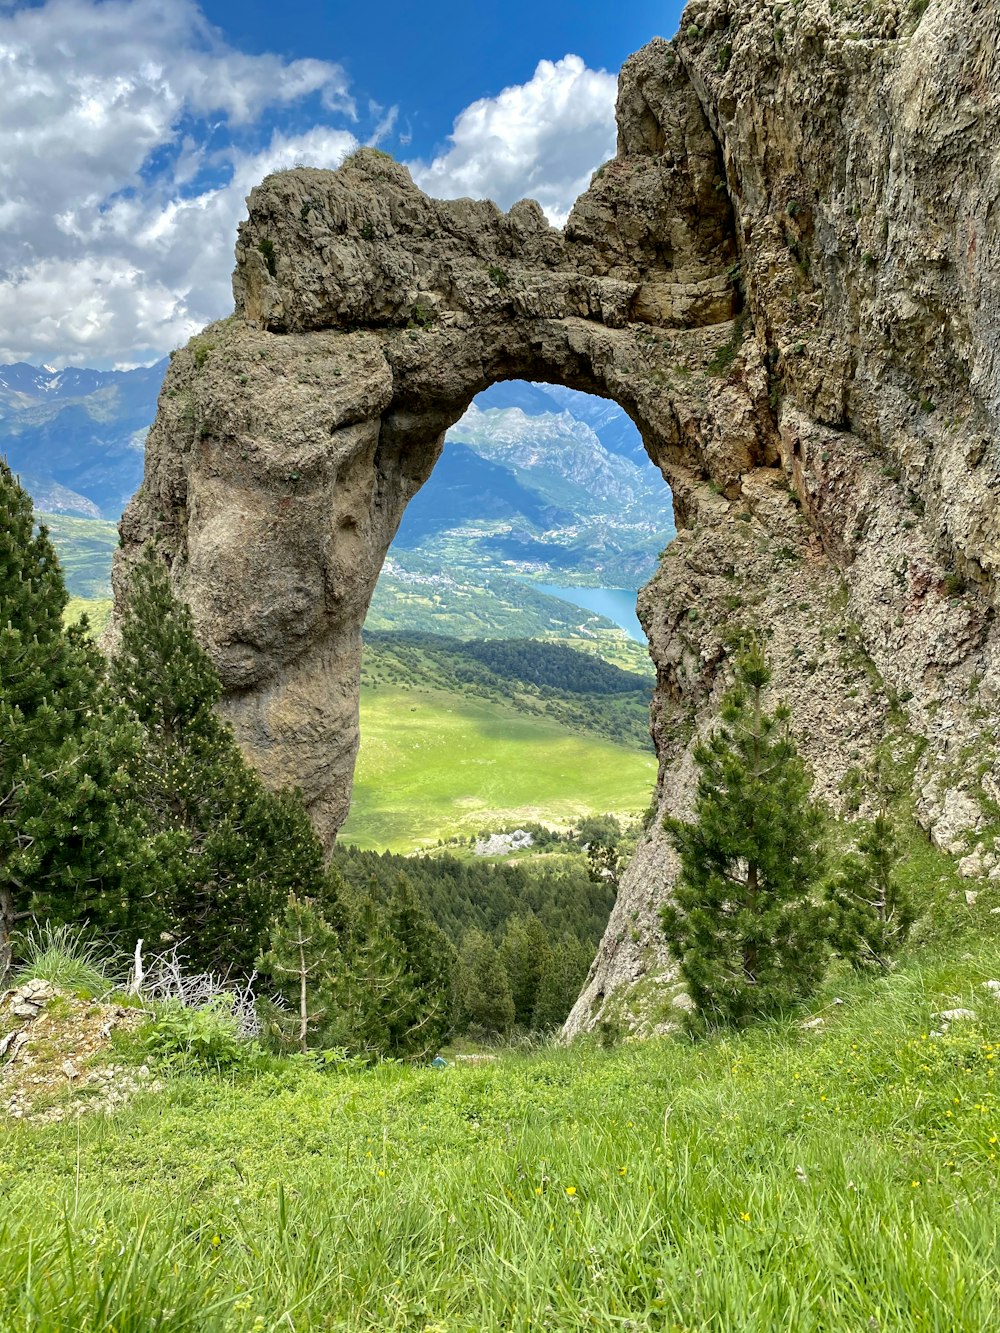 a rock formation with a hole in the middle of it